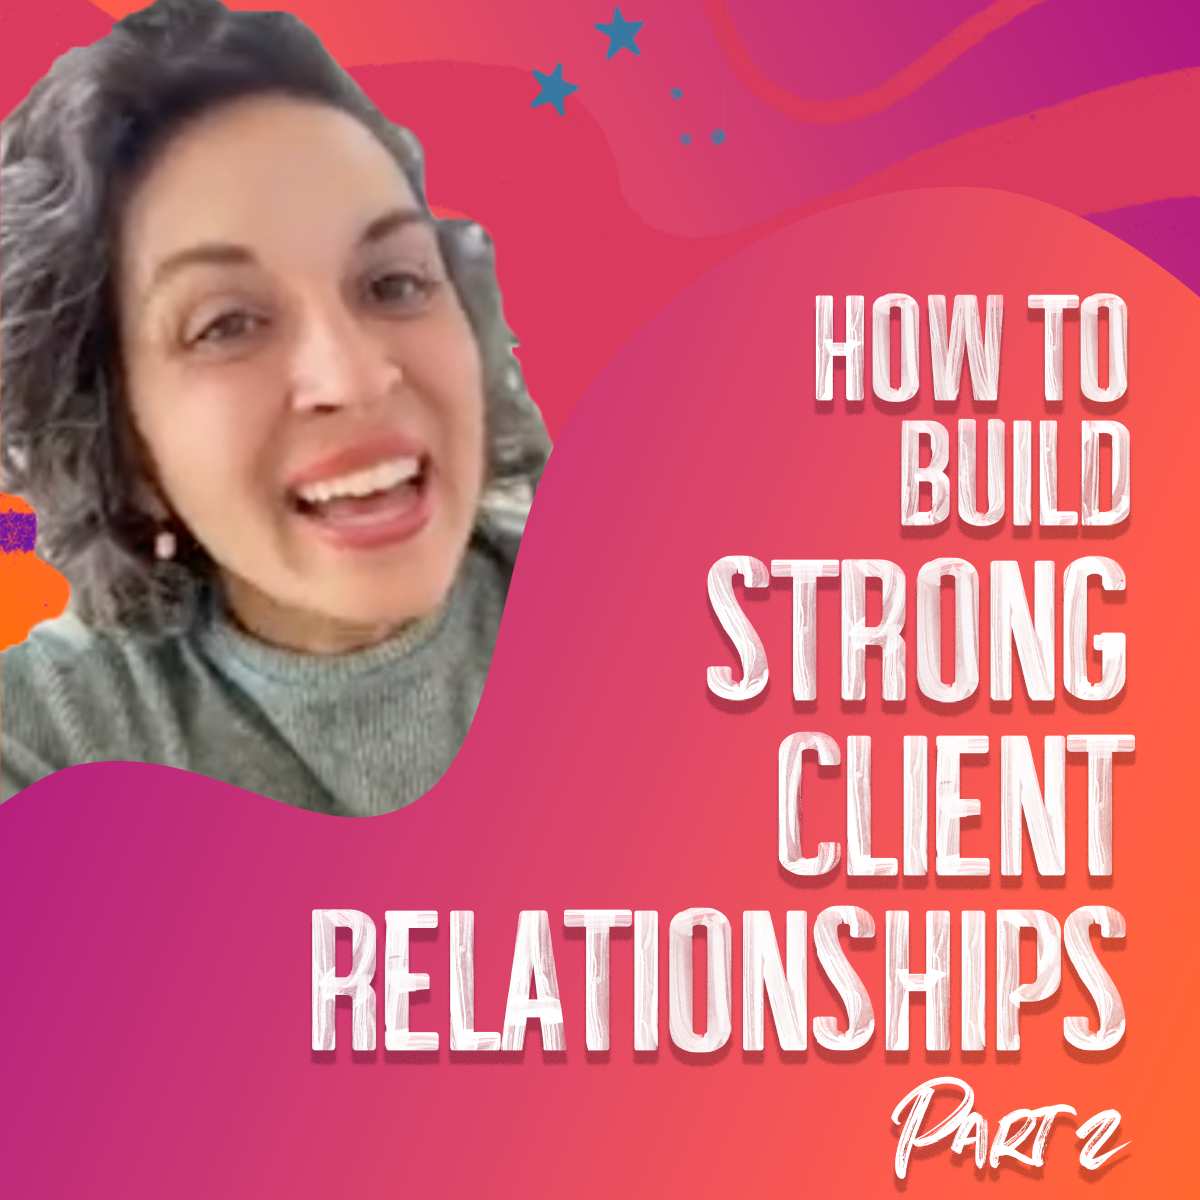 How to Build Strong Client Relationships – Part 2